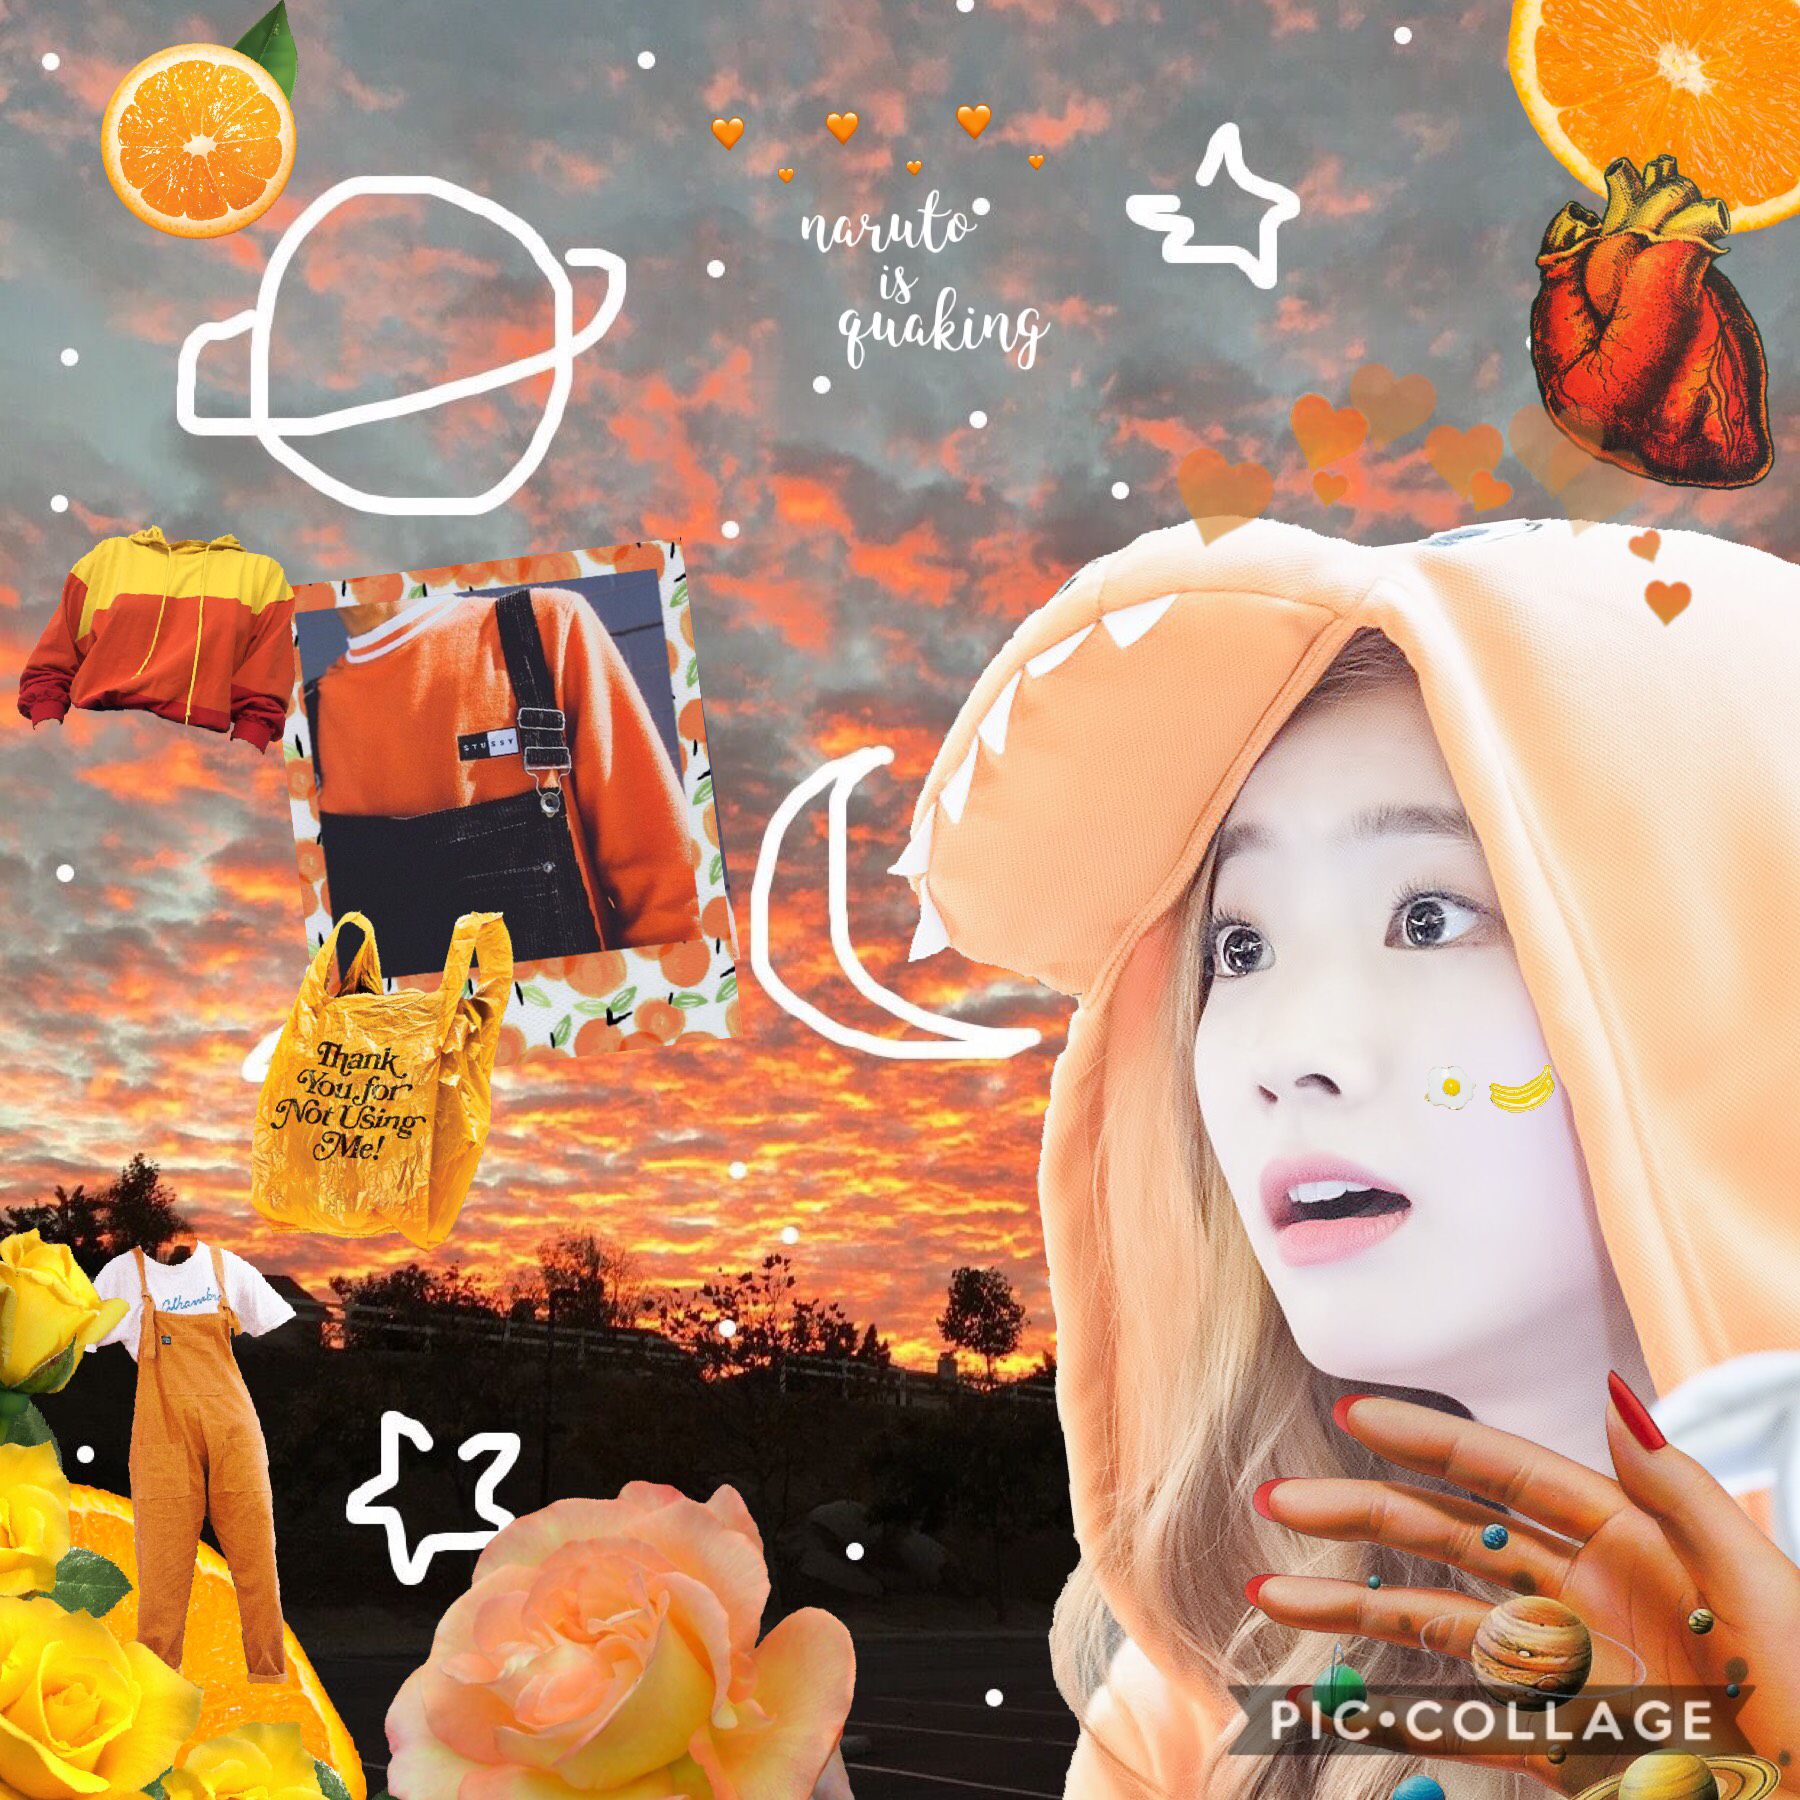 🧡tap🧡
so i don’t really listen to twice but i’m really proud of this edit sksksk
anyone got any kpop recommendations? kindness is obliged 

raffy
20:48
9|4|19
